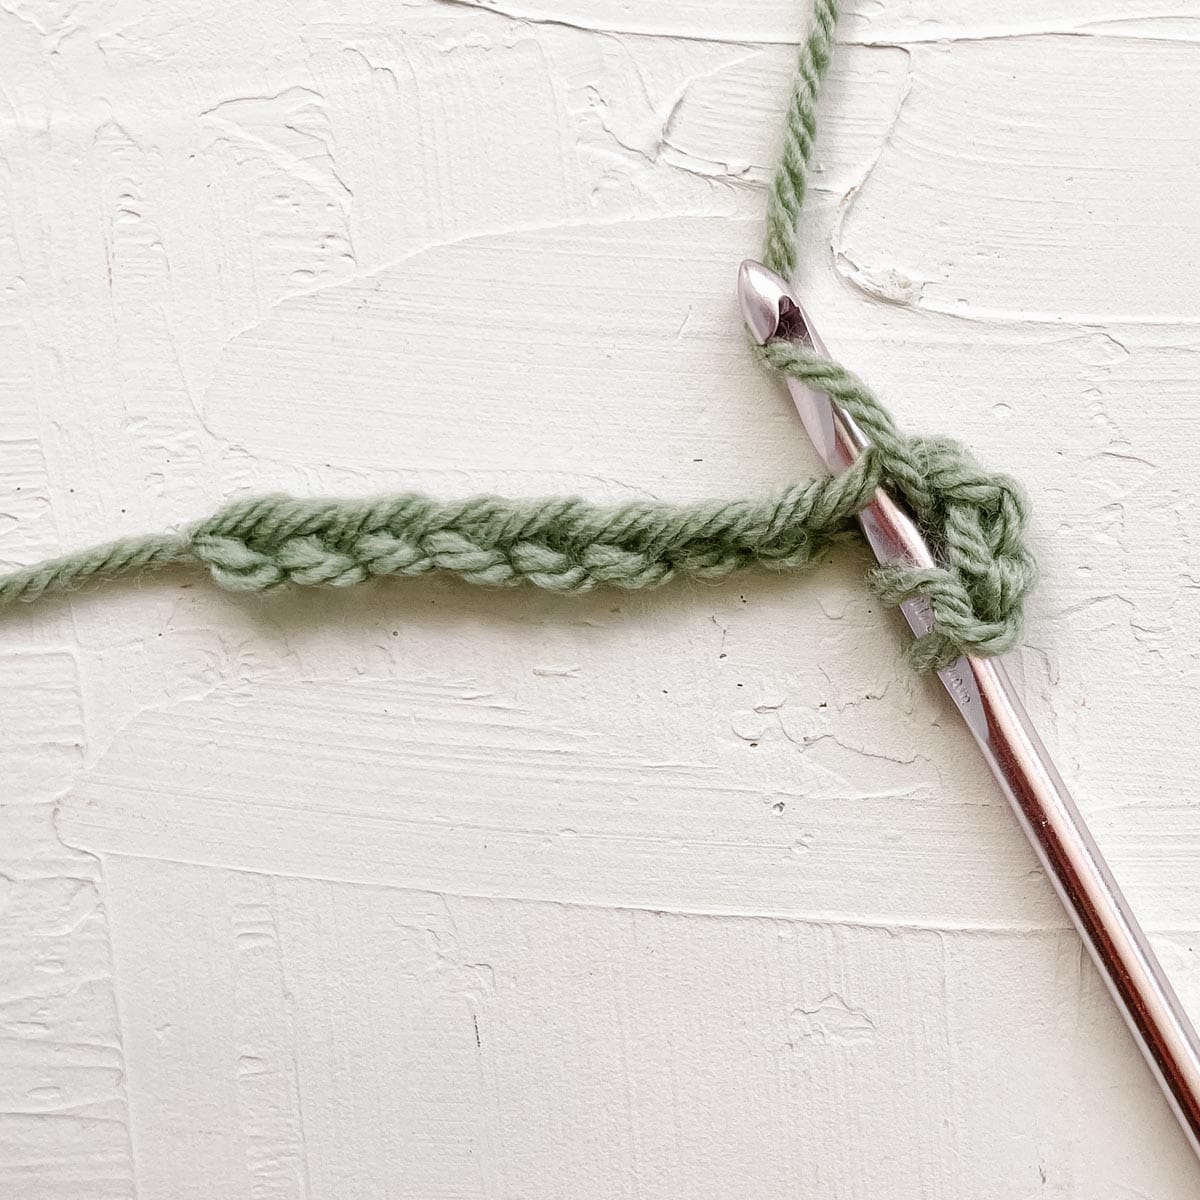 Step one of double crocheting: Yarn over and insert hook into fourth chain from the hook.